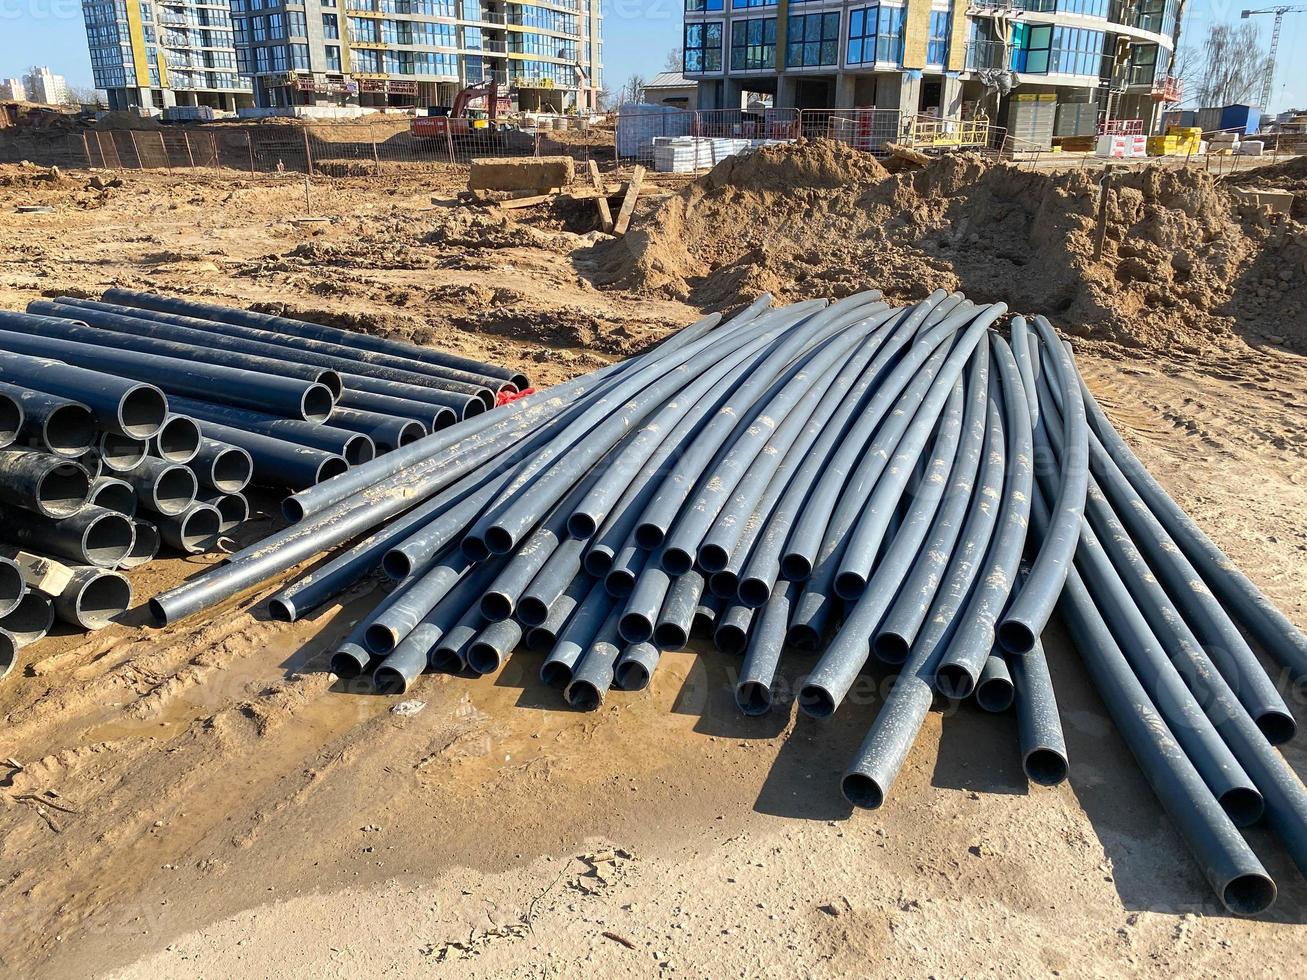 Modern polypropylene pipes for conducting heating mains underground. Durable and anticorrosive properties of water pipes, drainage system photo